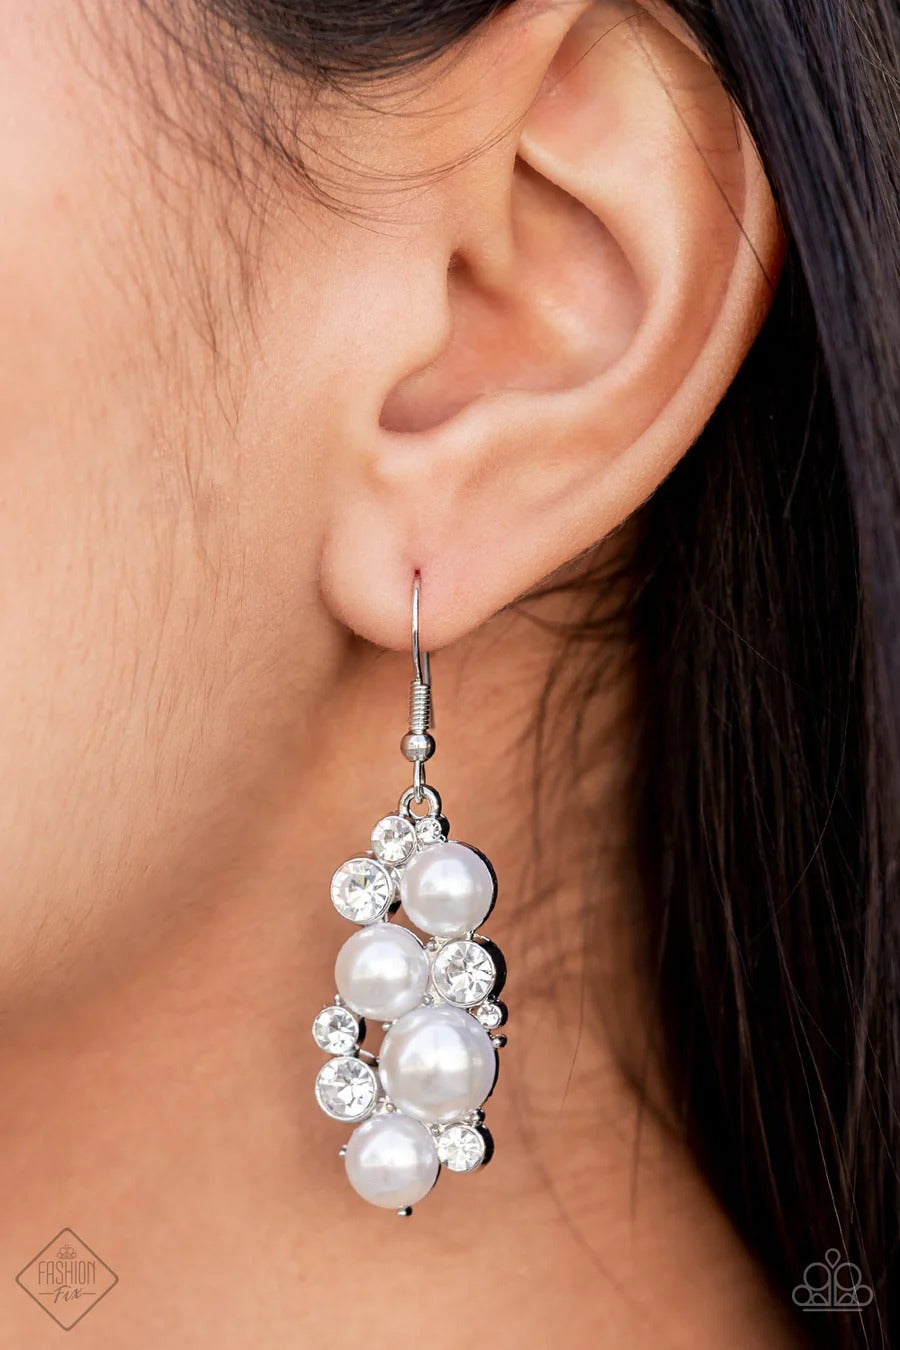 Fond of Baubles - White Pearl and Rhinestone Silver Fishhook Earrings, Fashion Fix